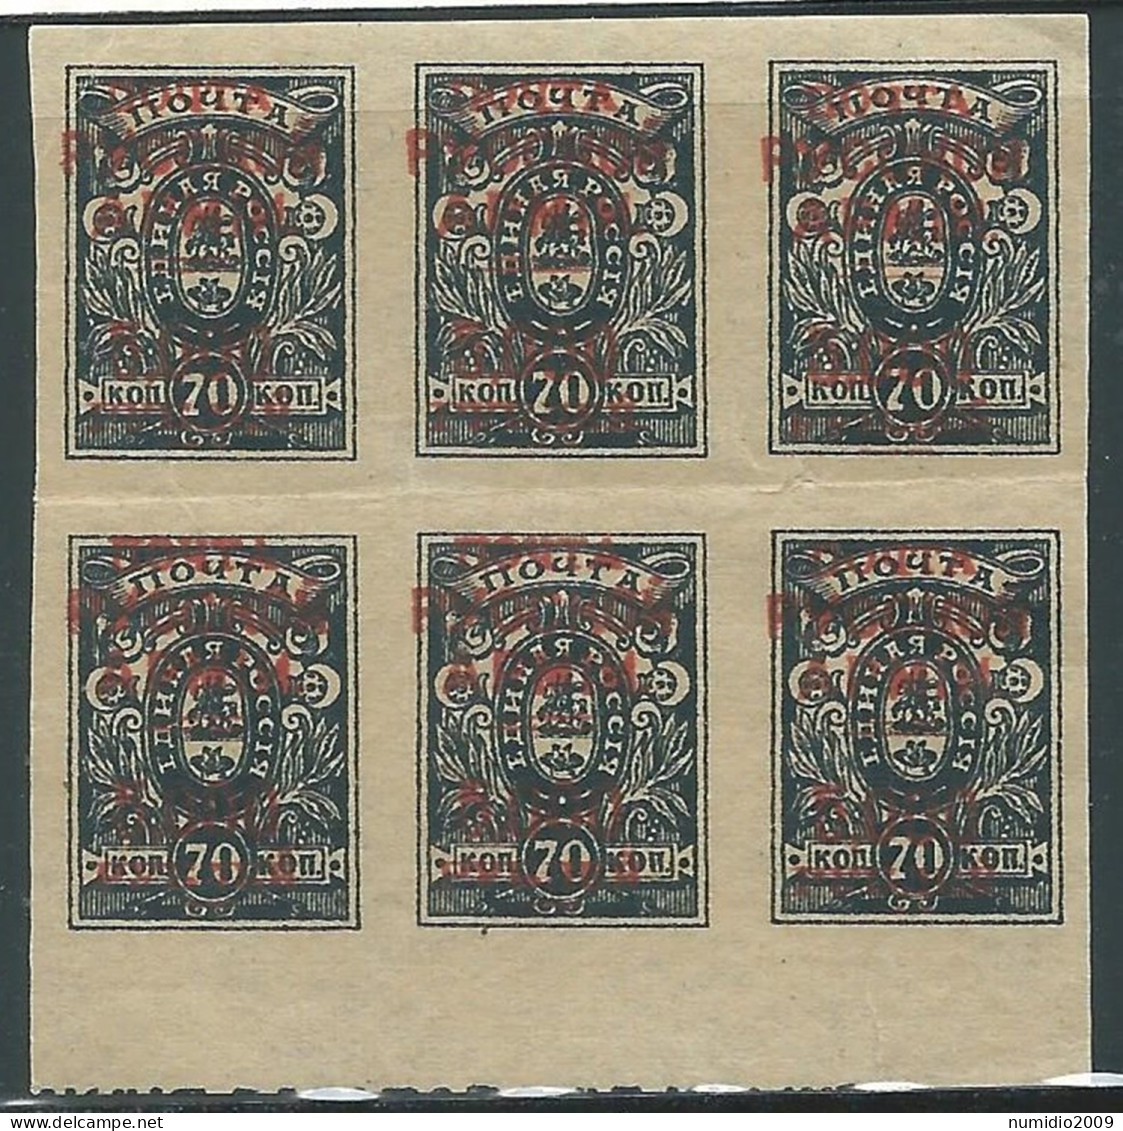 1921 RUSSIA WRANGEL ISSUES RUSSIAN STAMPS 20000 R SU 70 K SET OF 6 MH * - SV14 - Armée Wrangel